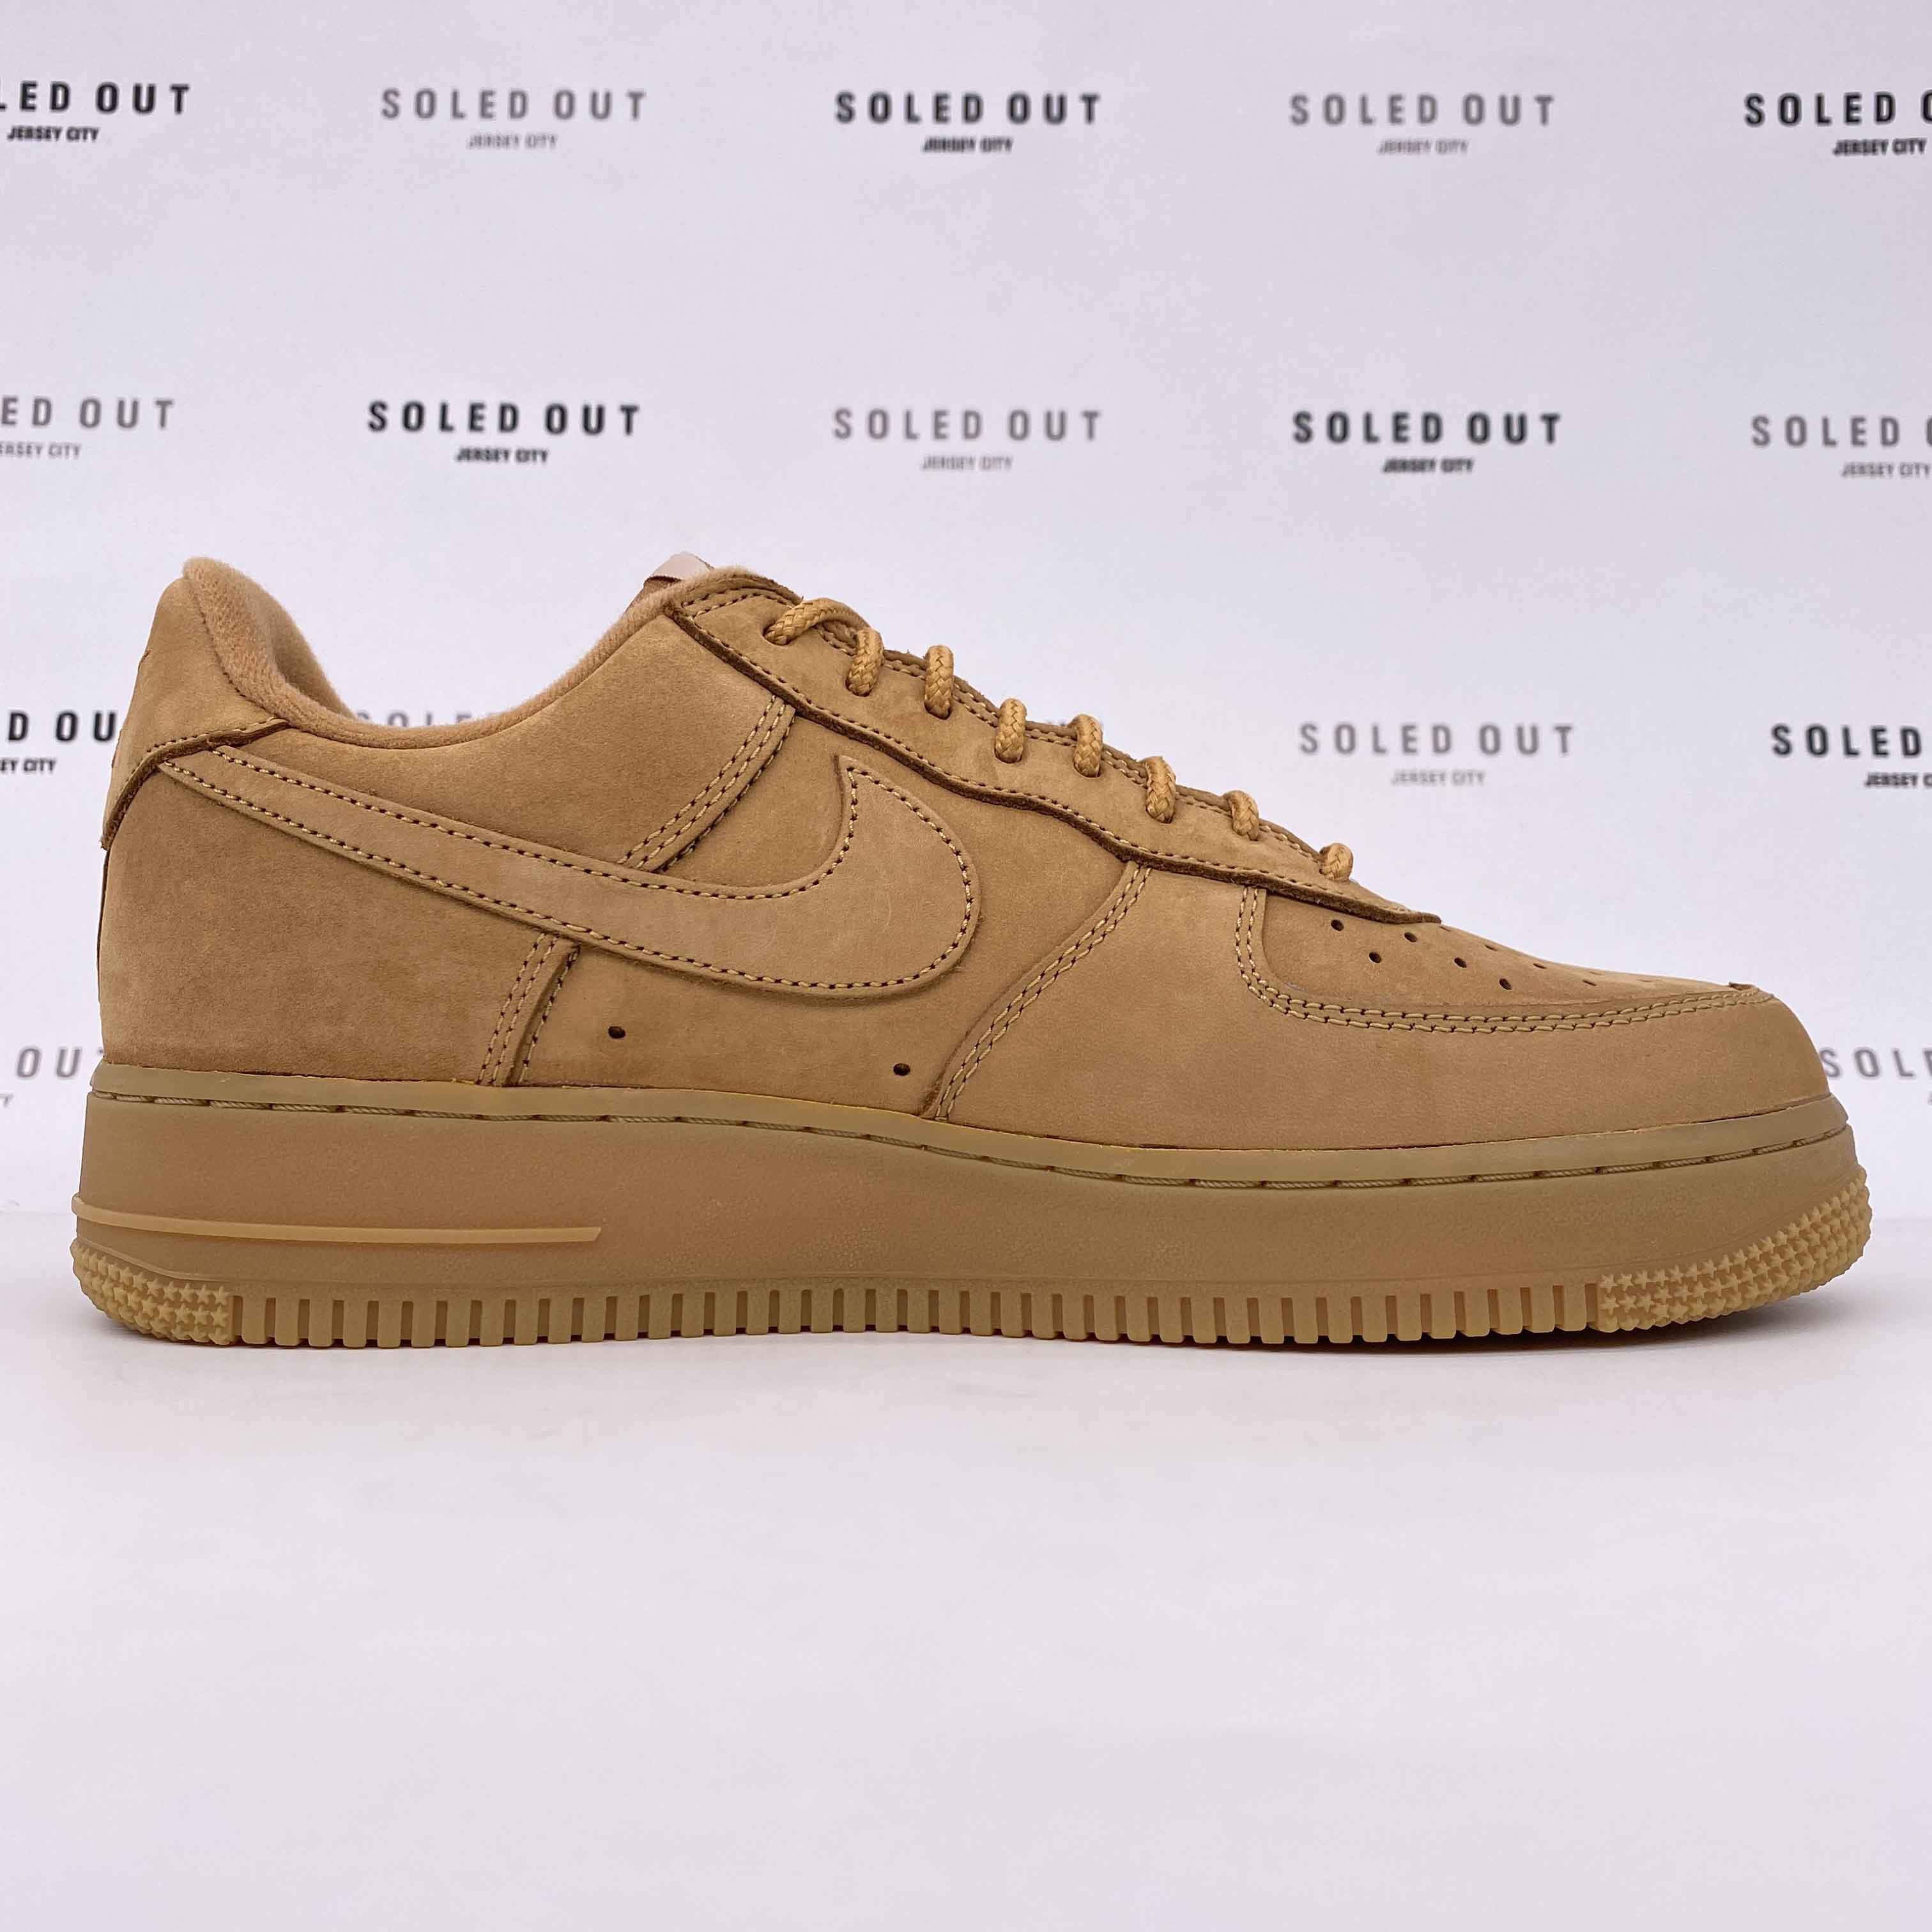 Nike Air Force 1 Low "Supreme Wheat" 2021 New Size 9.5